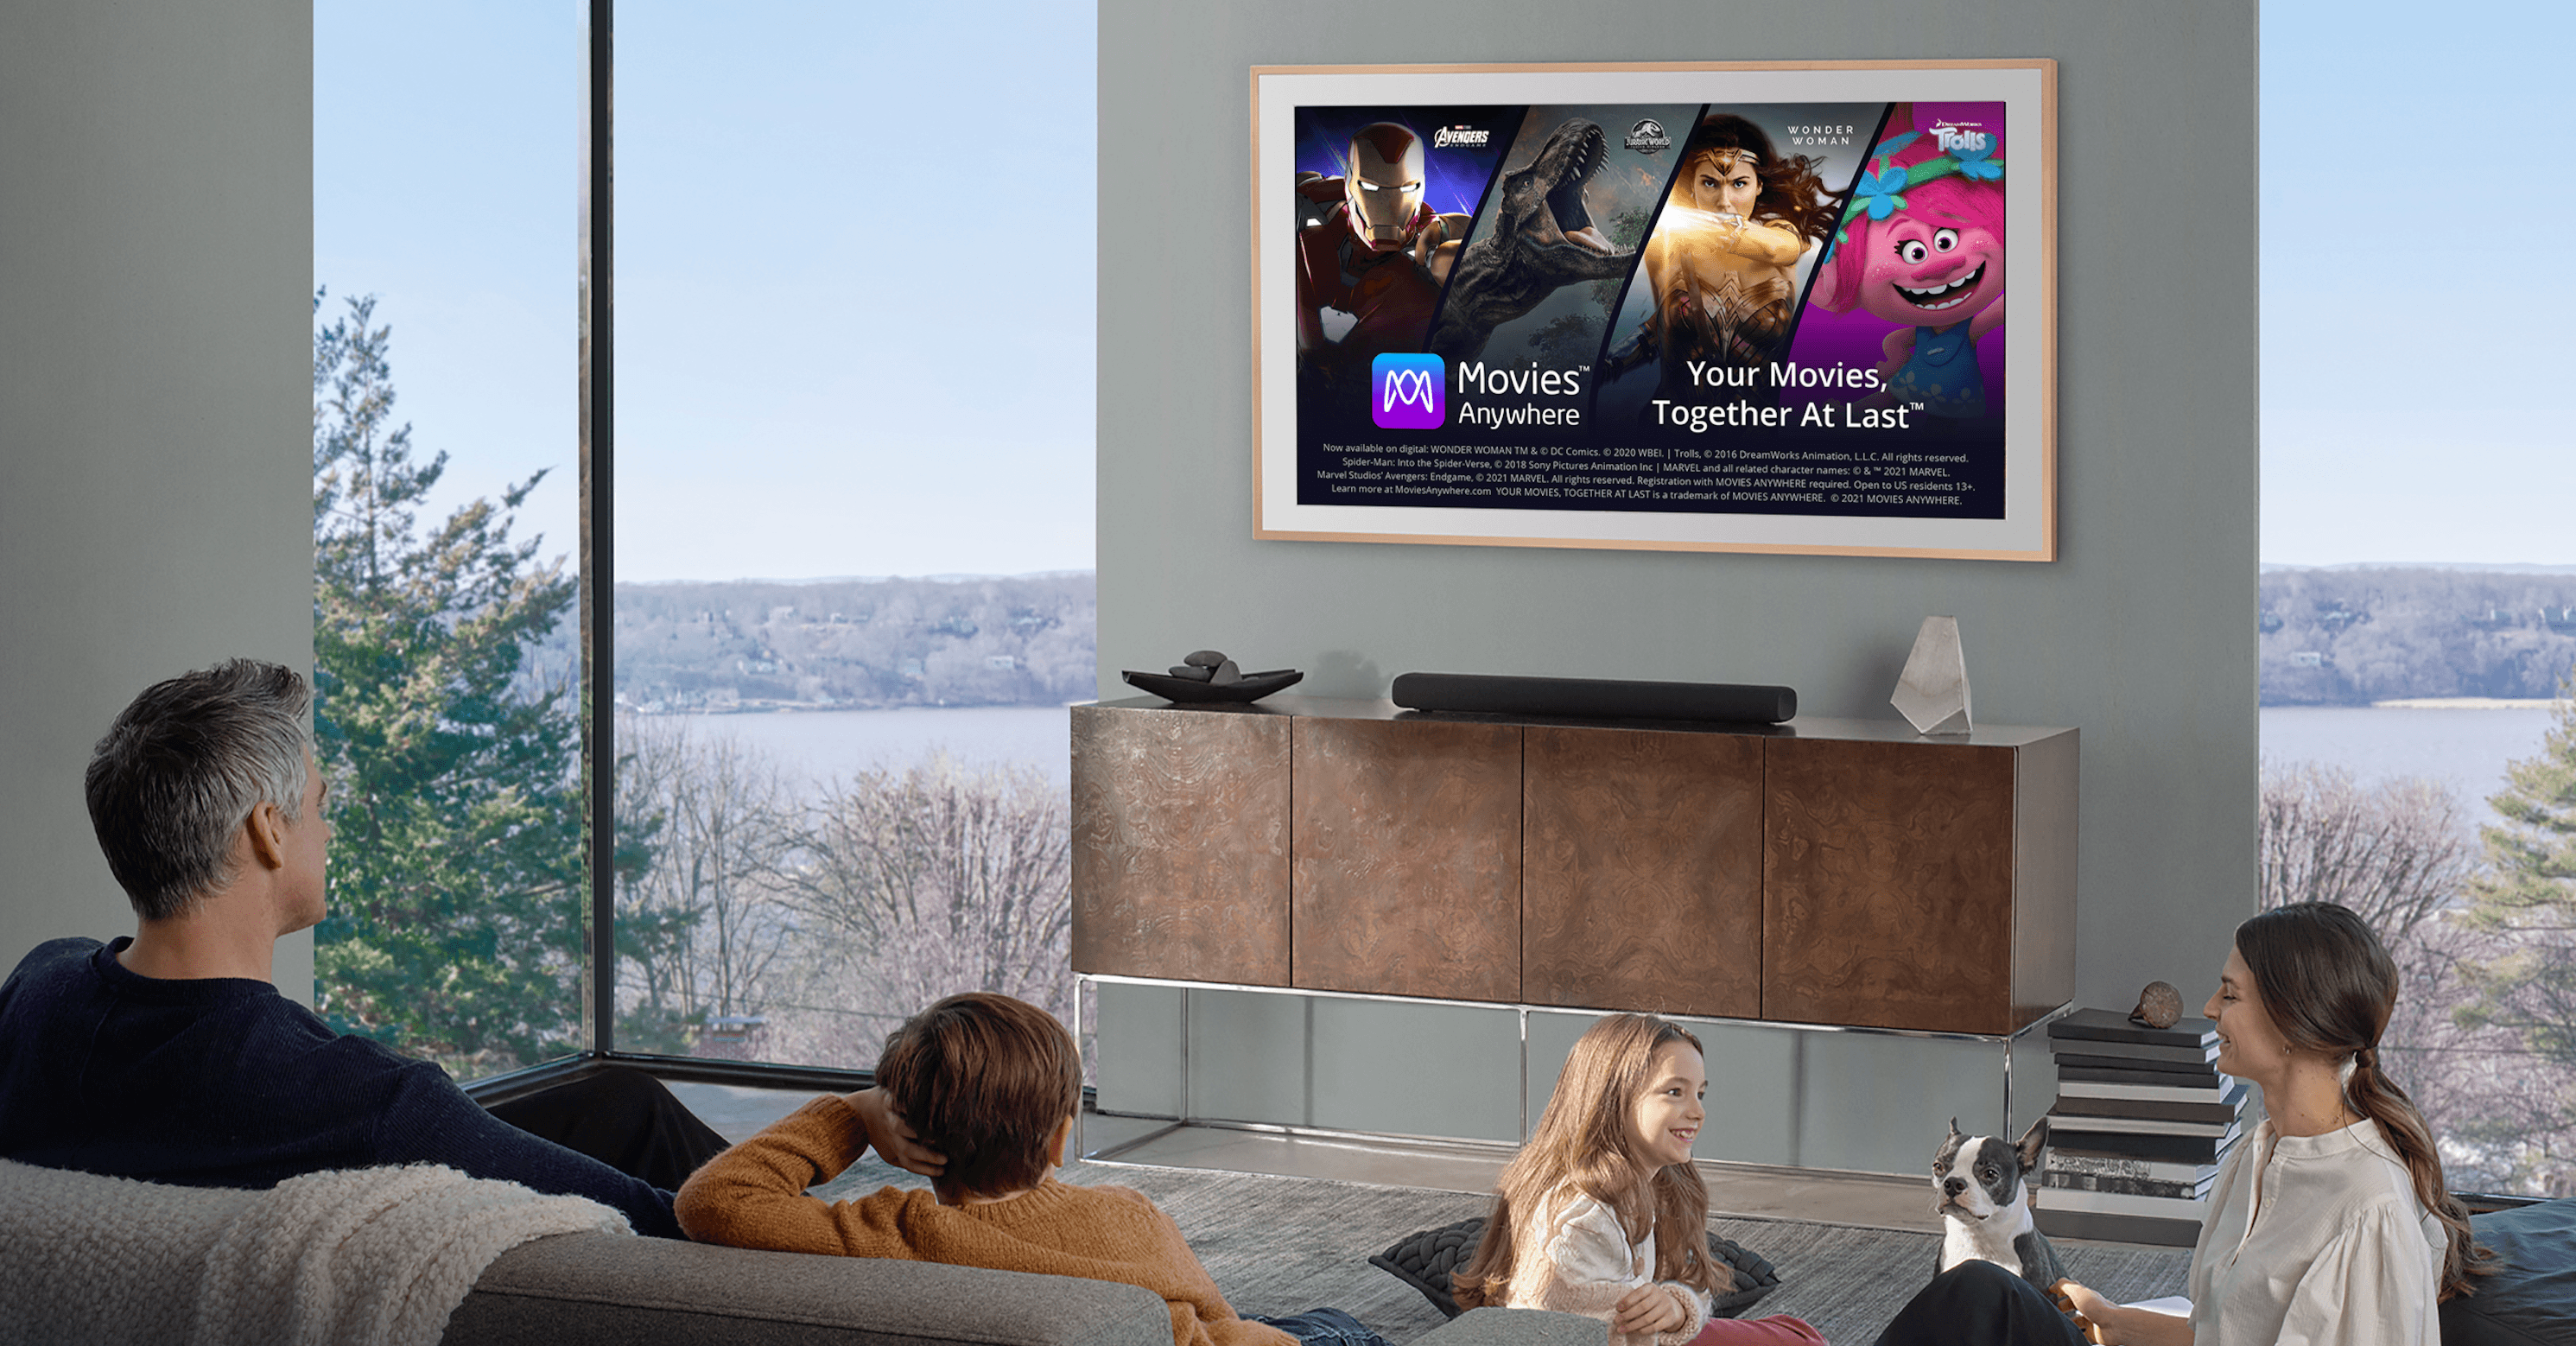 Movies Anywhere is Now Available on Samsung Smart TVs